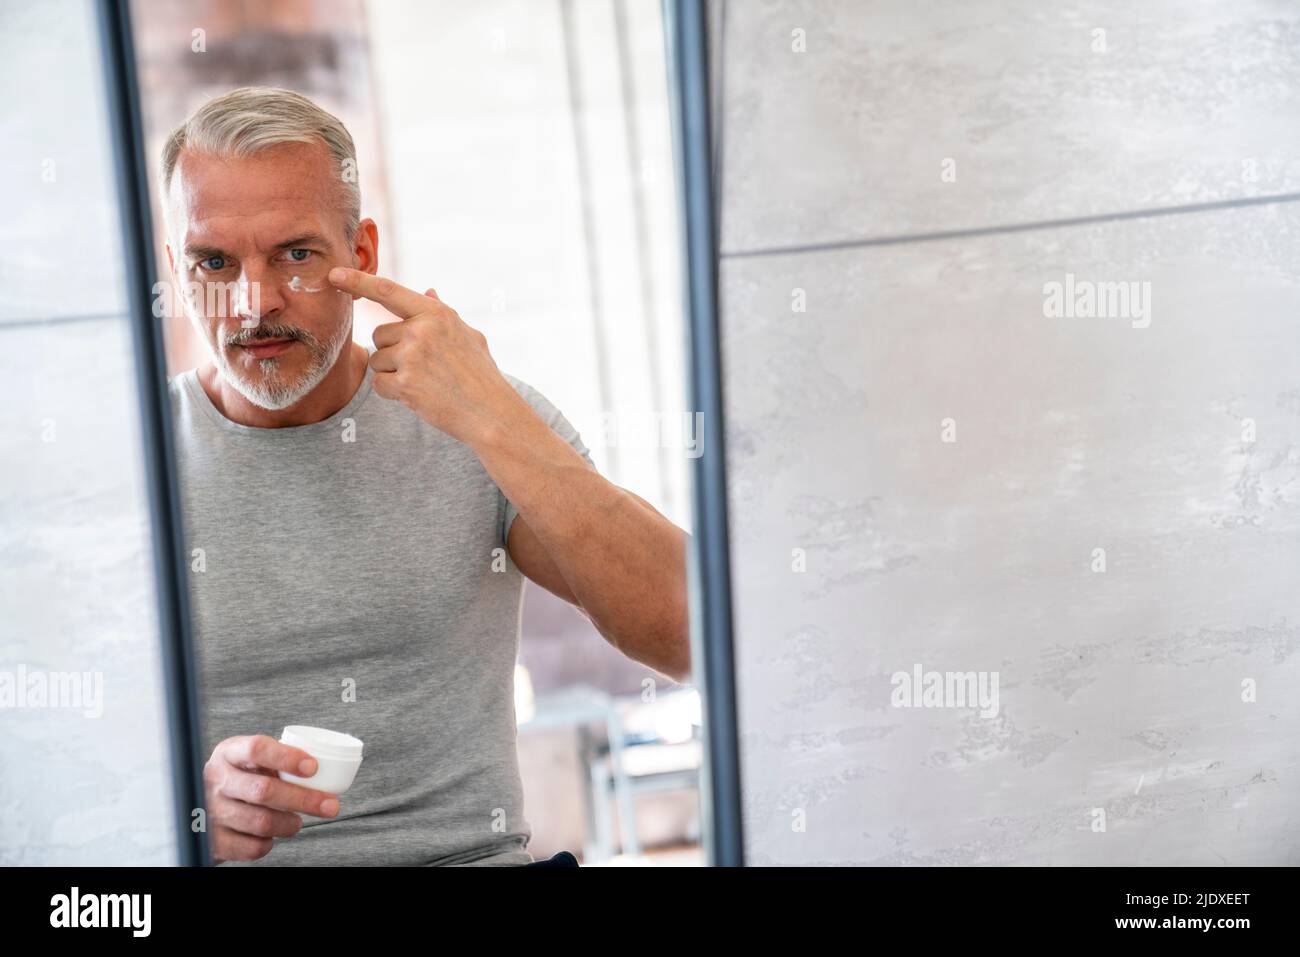 Man applying on moisturizer face looking at mirror in bathroom Stock Photo